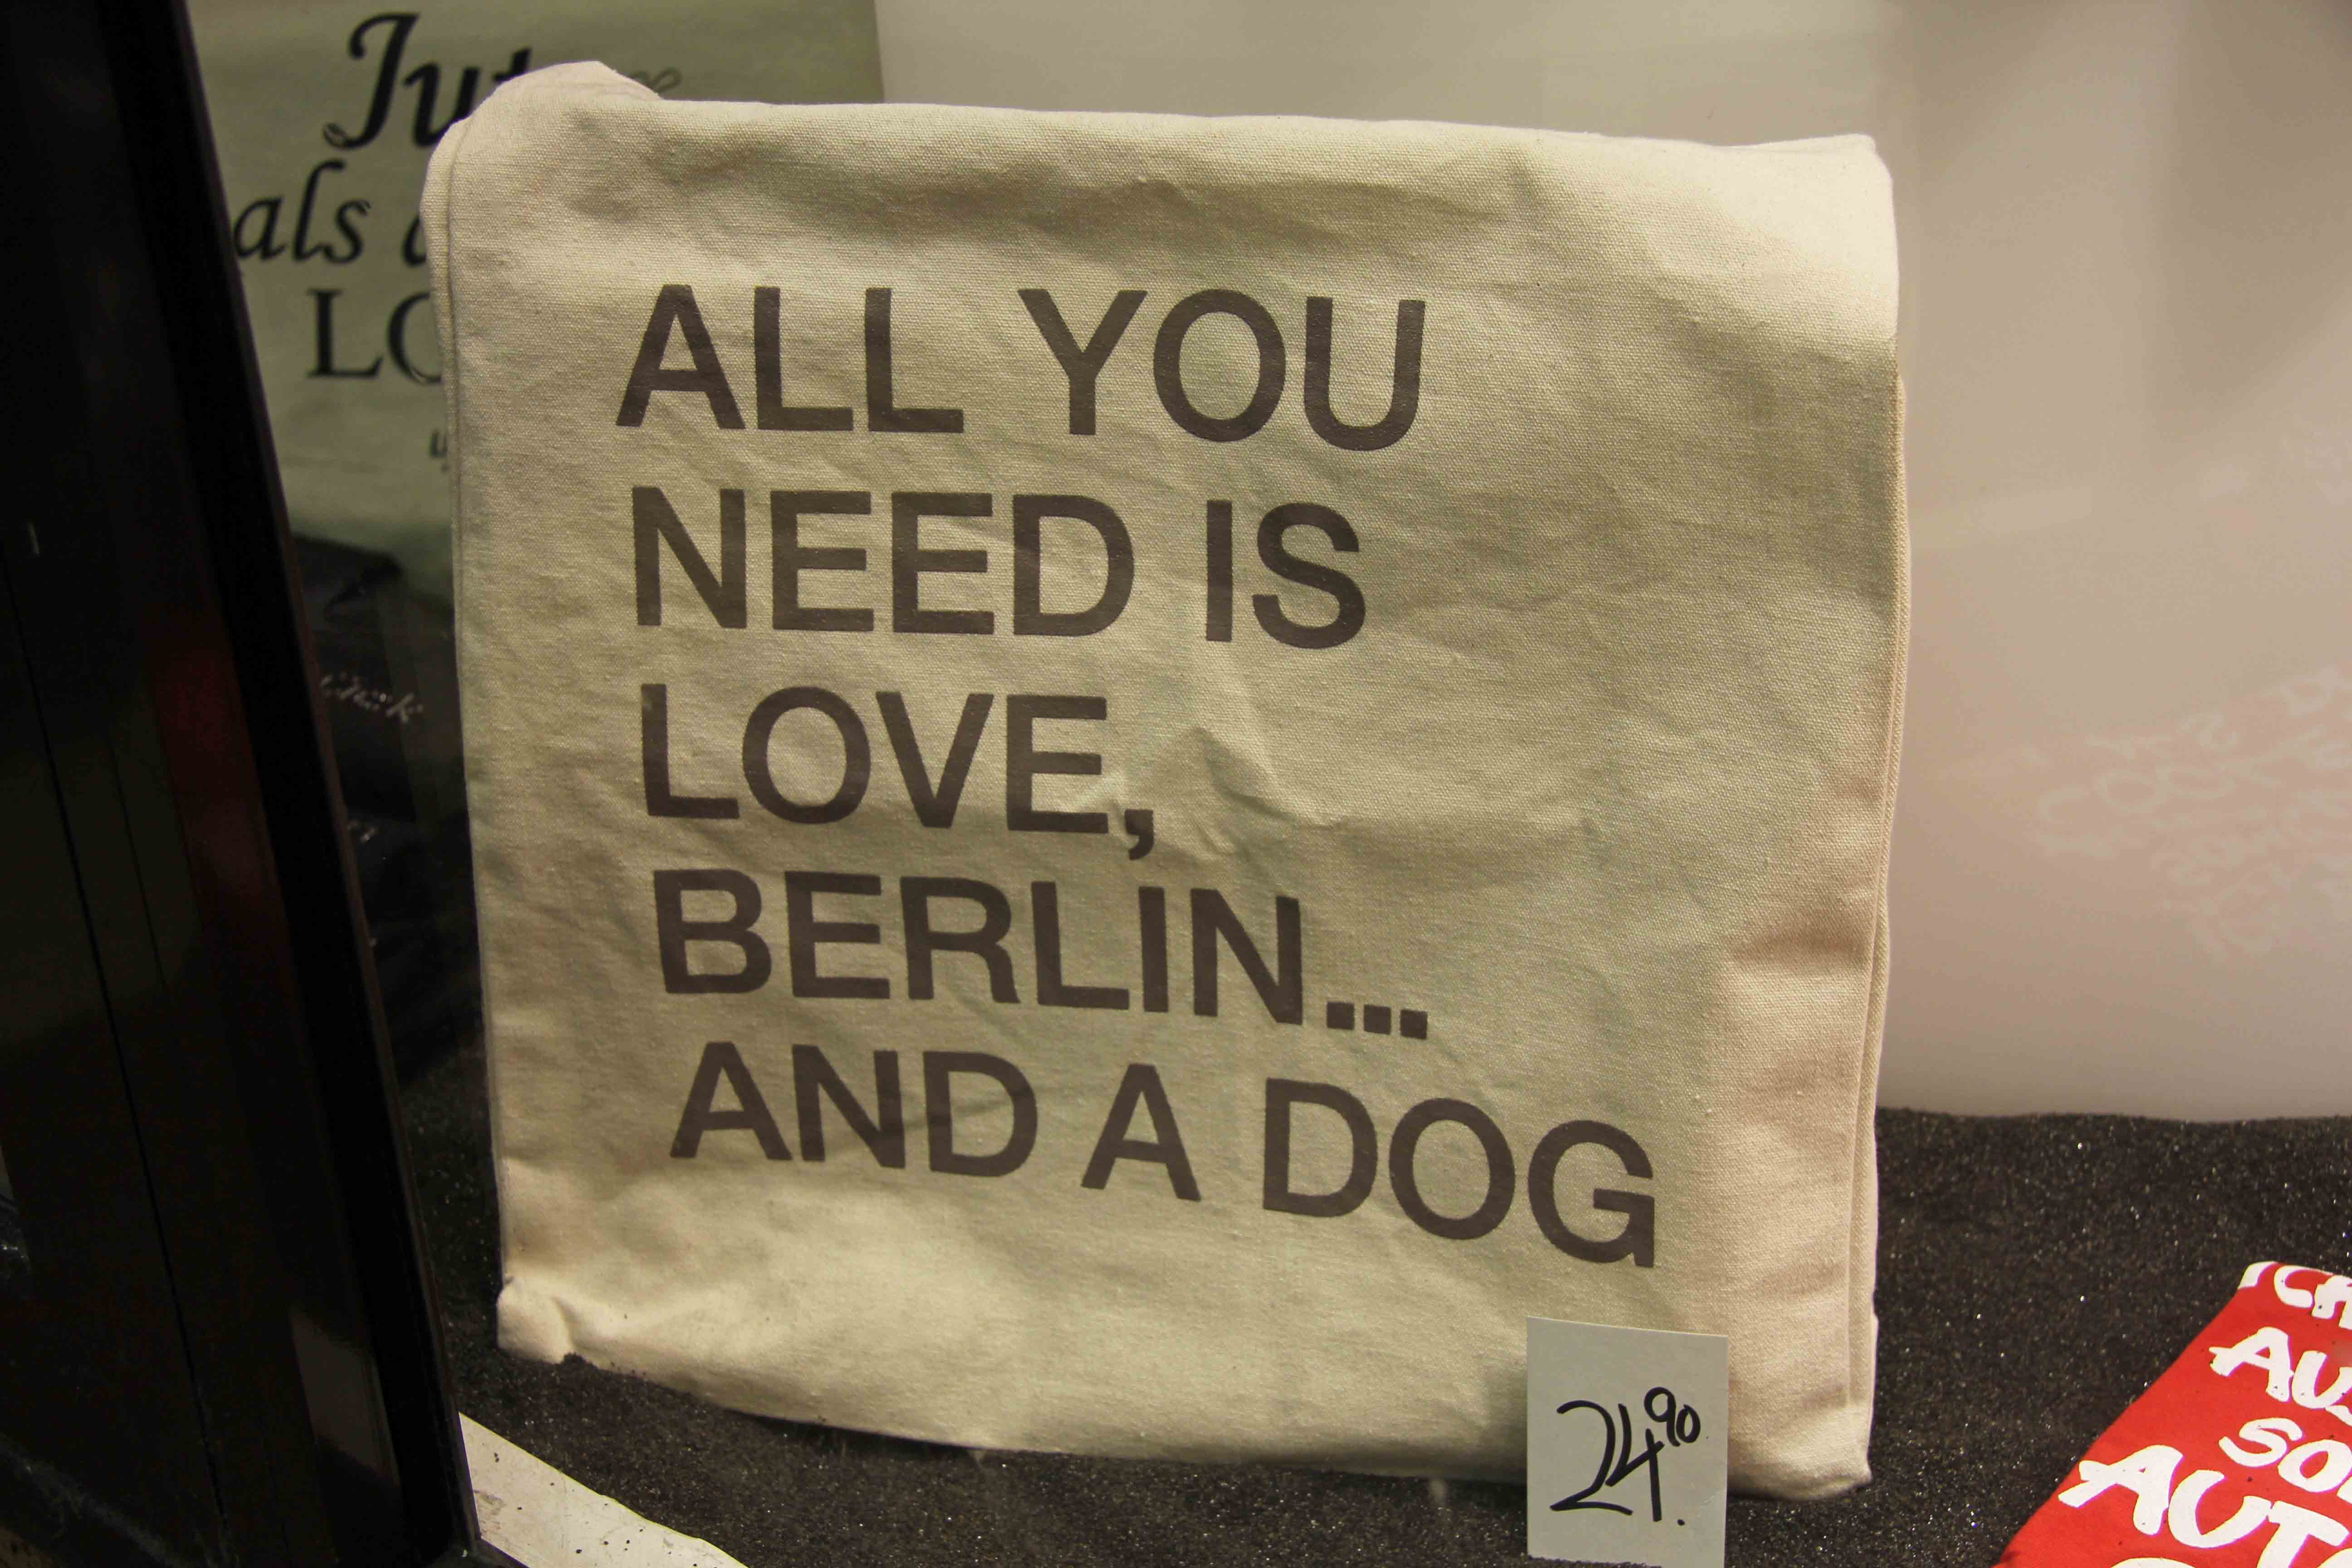 All you need is love, Berlin and a dog - tote bag (Beutel) in shop window at Zoologischer Garten station